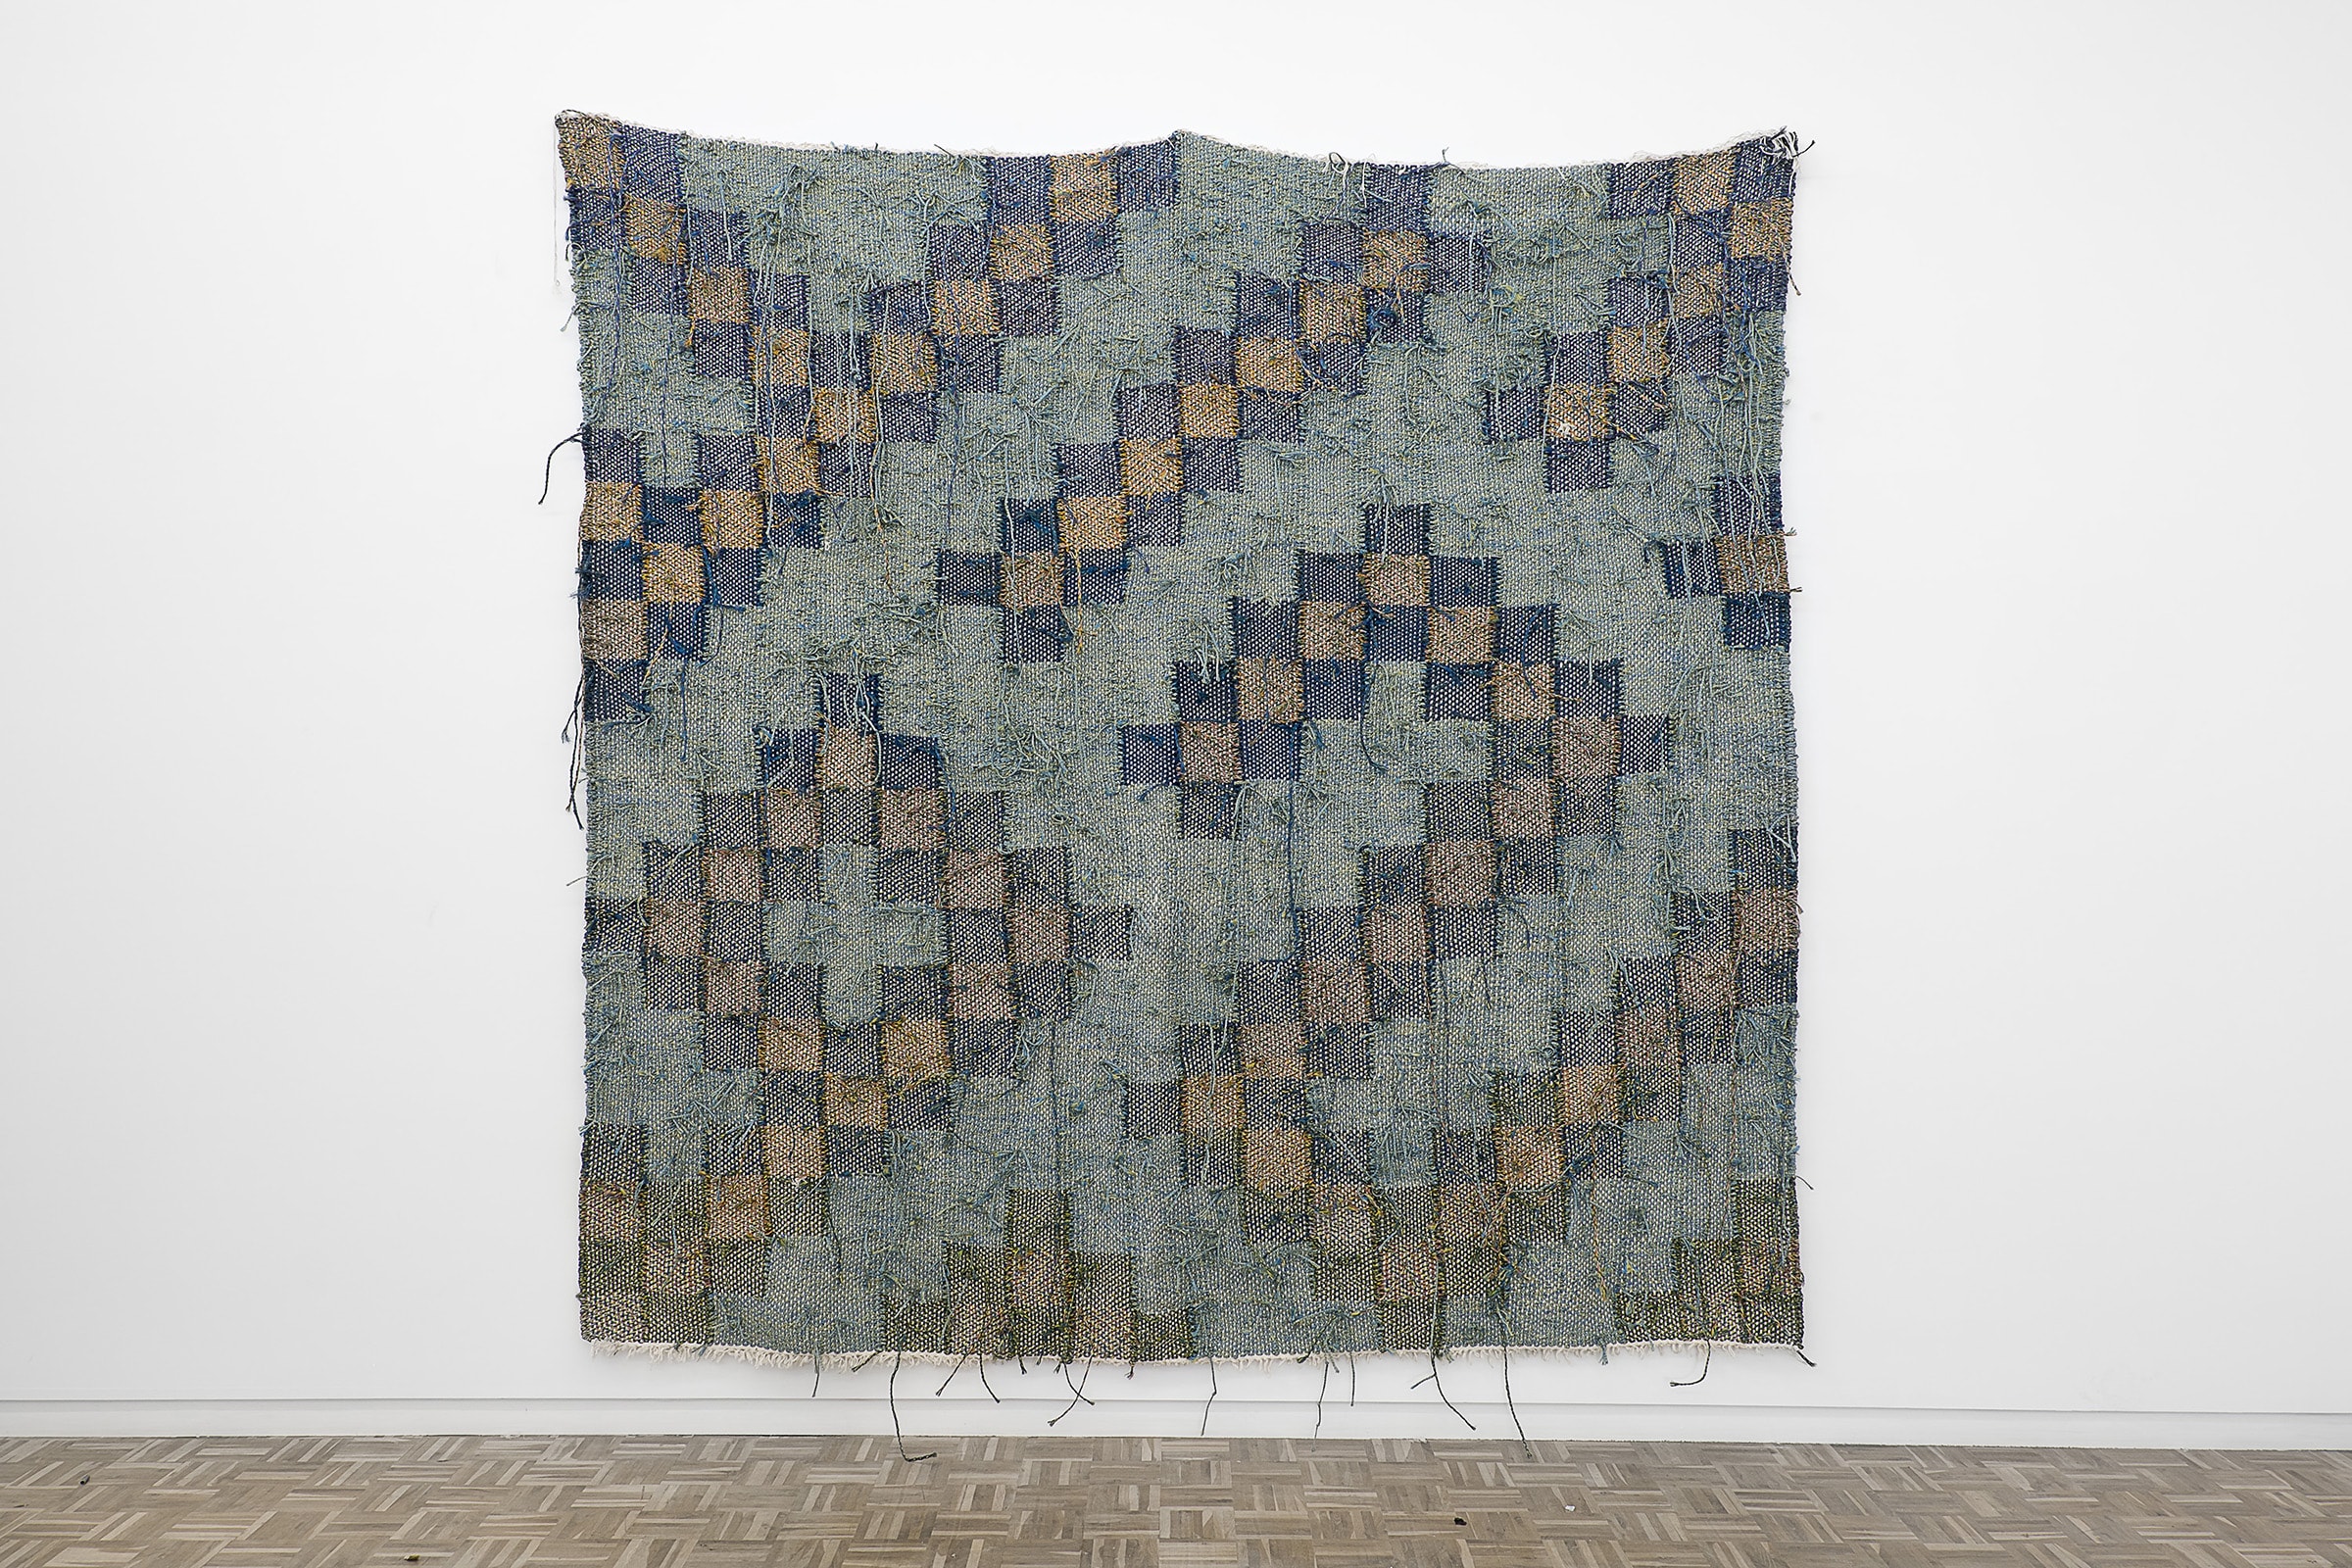 Installation view of Igshaan Adams, Akbar, 2017, in ‘To Weave the Sky: Textile Abstractions in the Jorge M. Pérez Collection’. Courtesy of El Espacio 23.